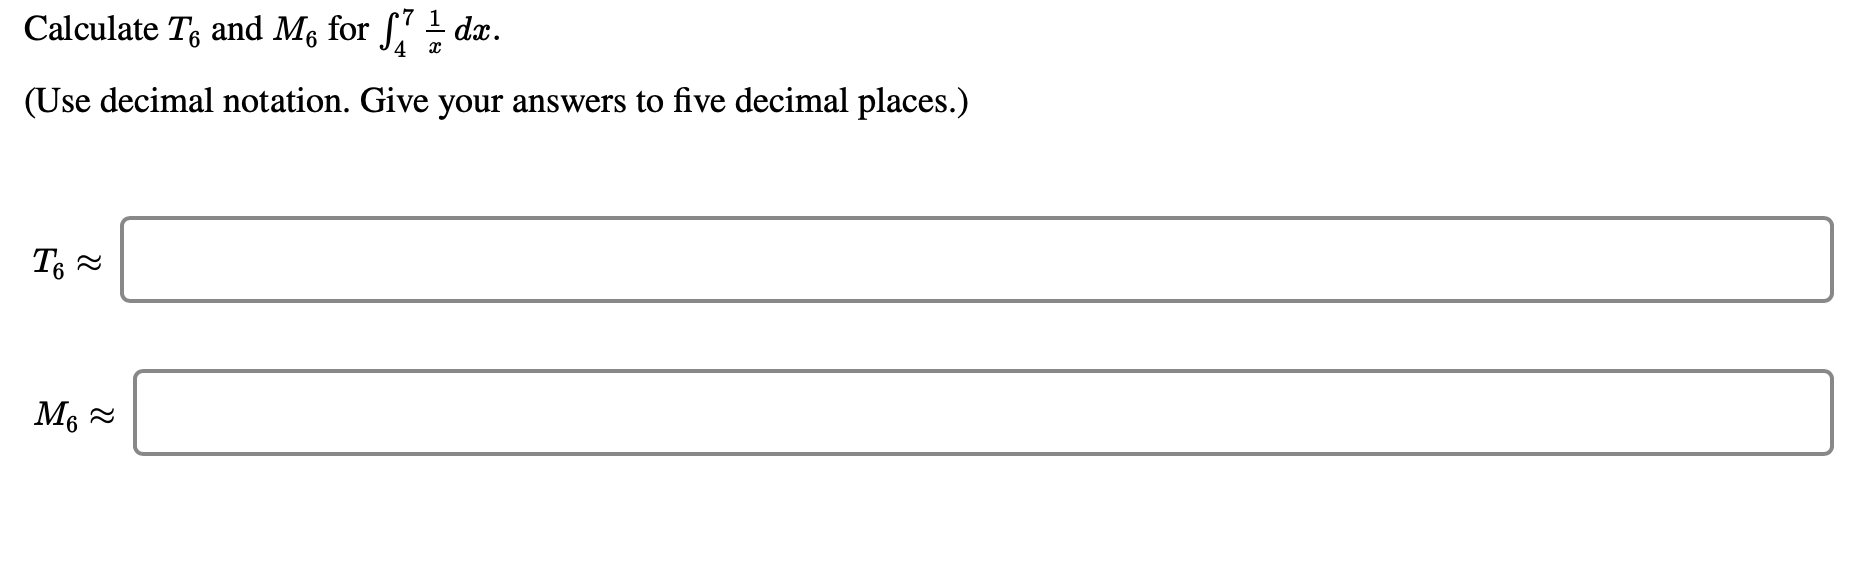 Calculate T, and M, for f dx.
(Use decimal notation. Give your answers to five decimal places.)
